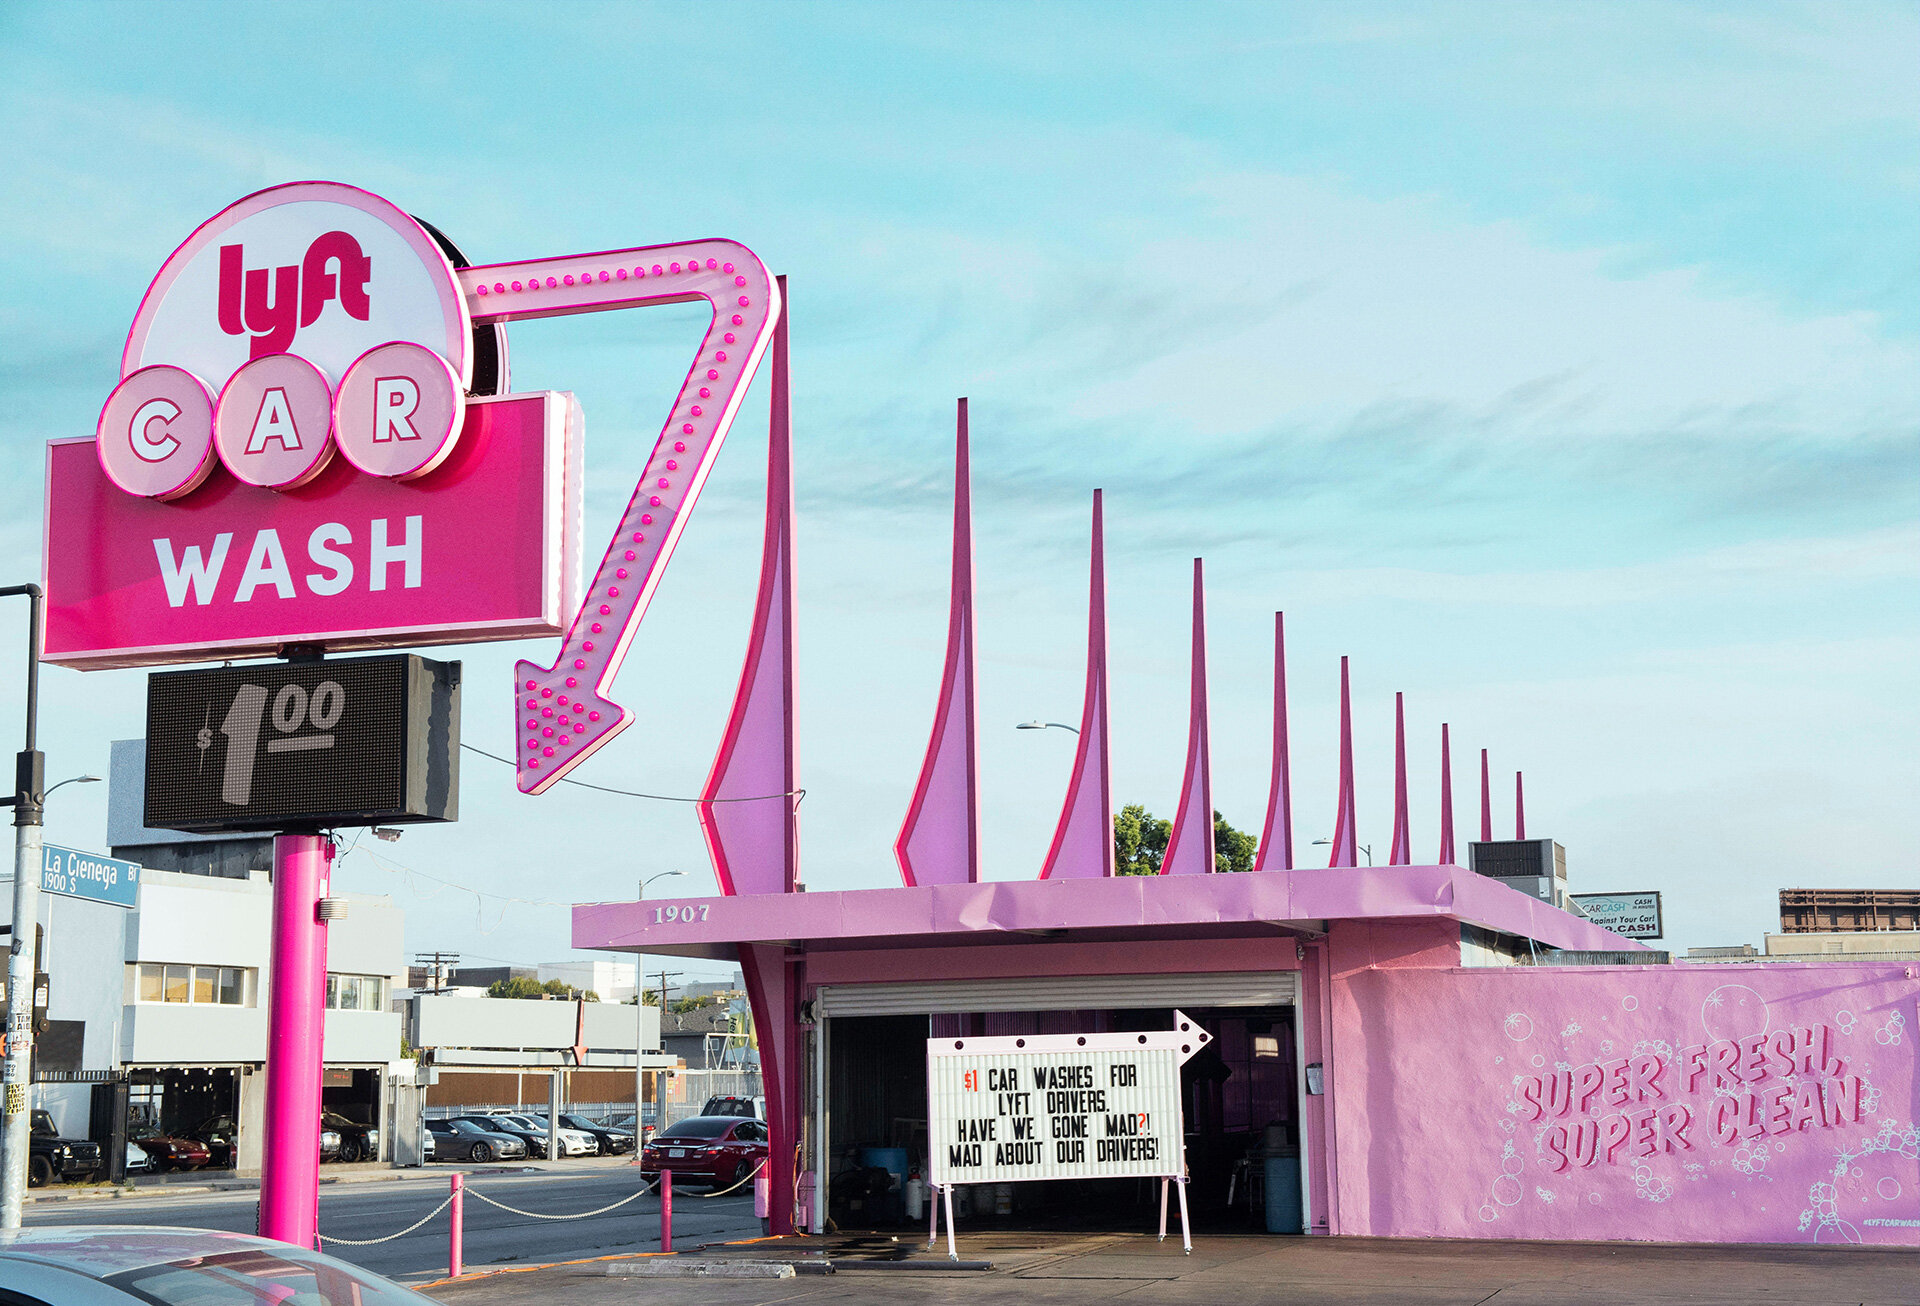  We created a $1 car wash for Lyft drivers only.  